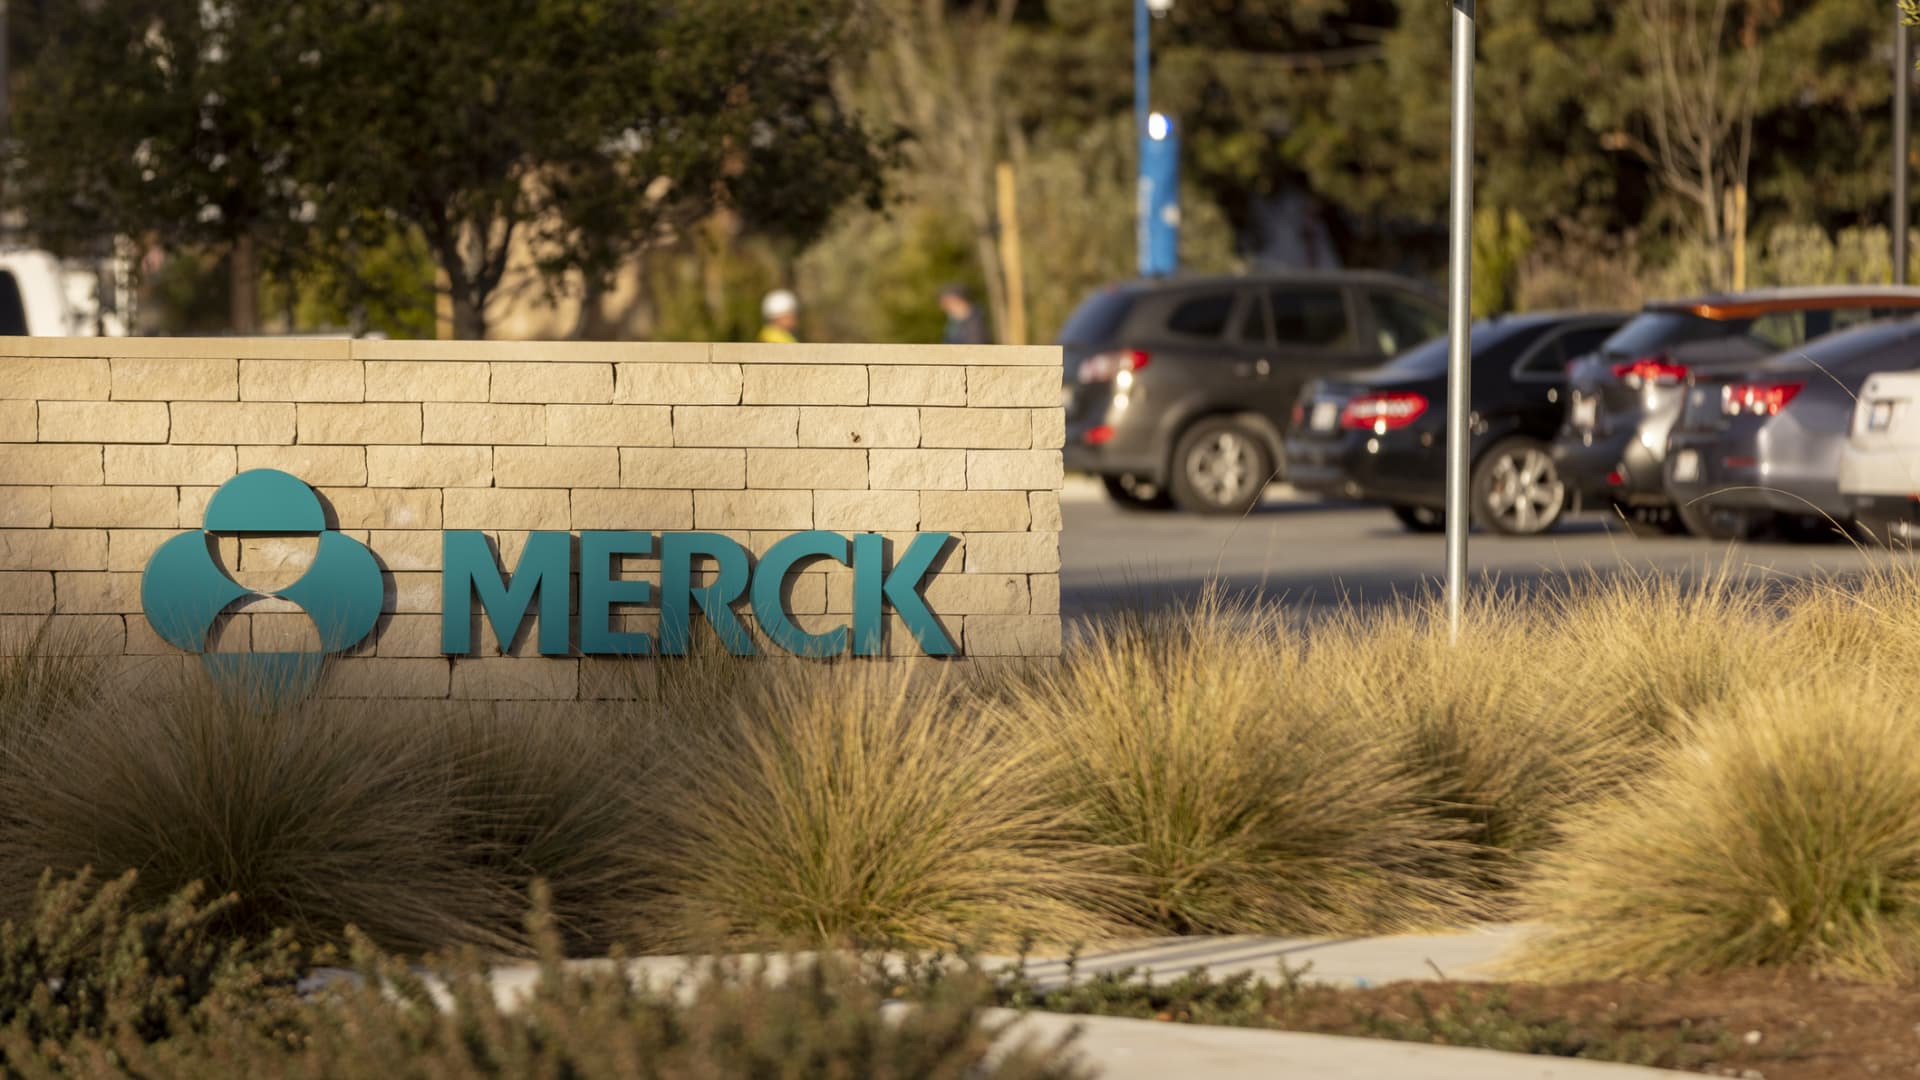 Stocks making the biggest moves midday: Merck, Bristol-Myers Squibb, Align Technology and more